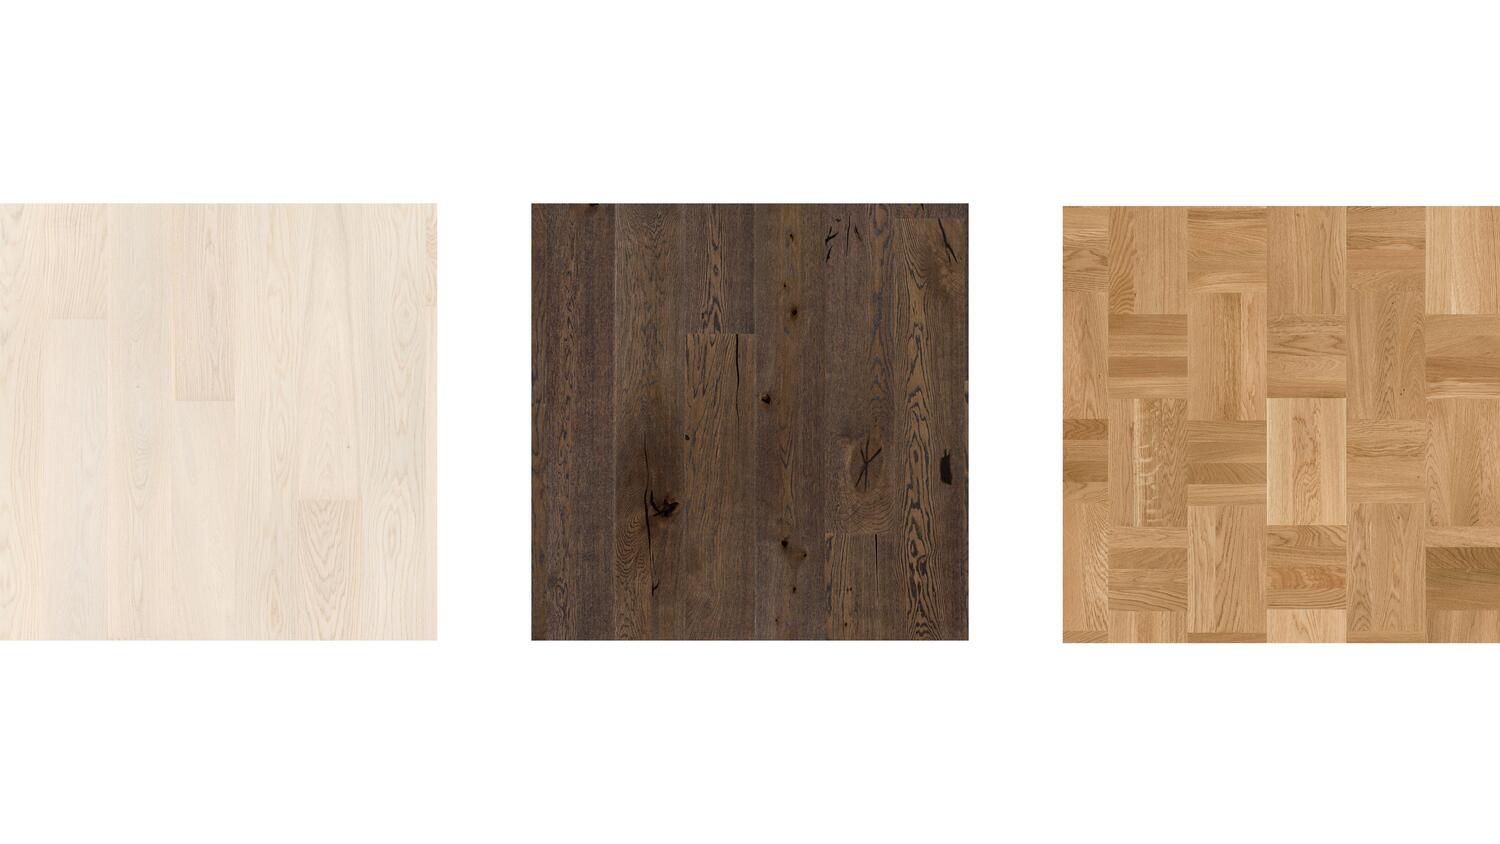 3 different colour and patterns of wooden floors